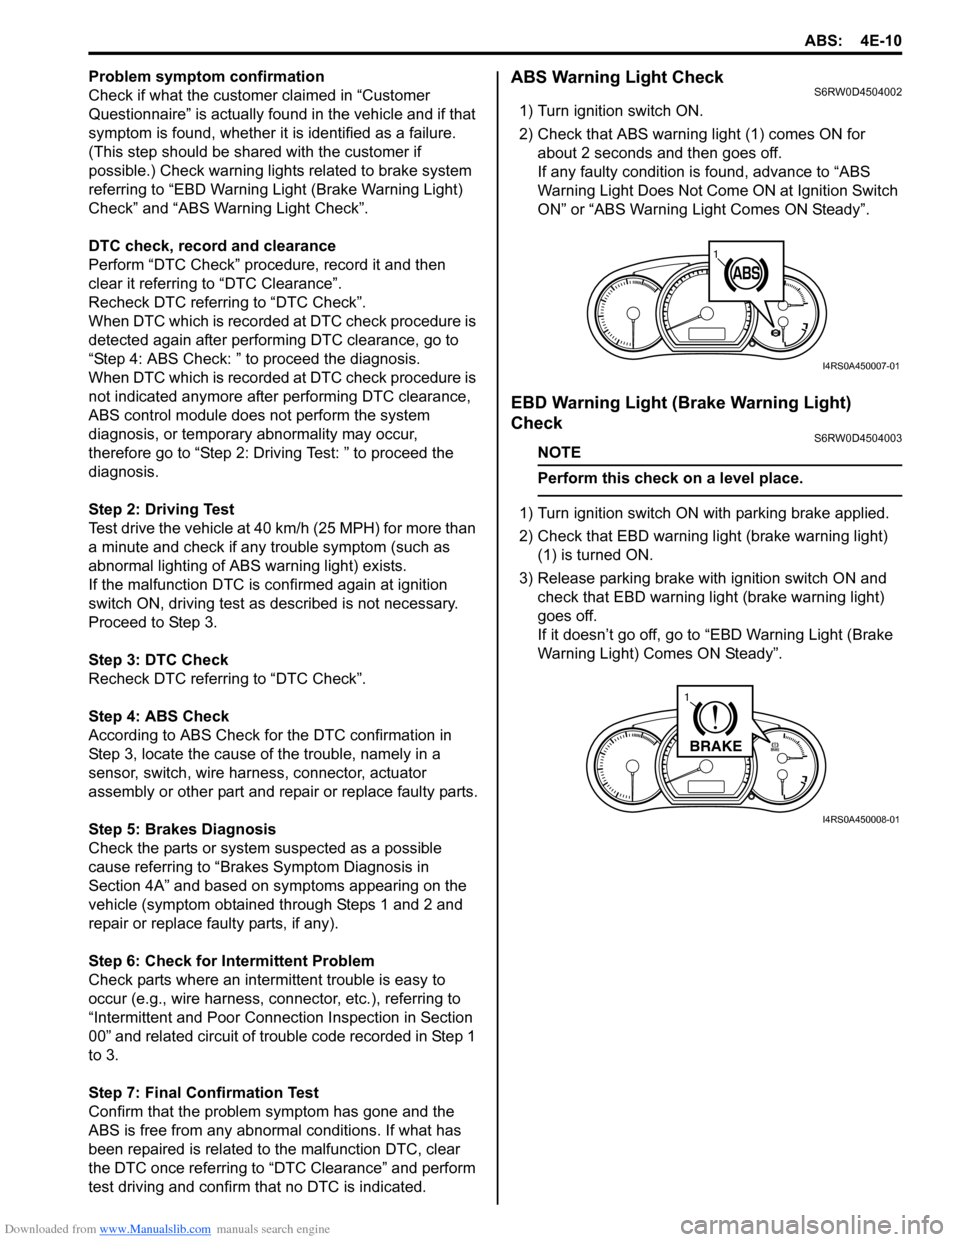 SUZUKI SX4 2006 1.G Service Workshop Manual Downloaded from www.Manualslib.com manuals search engine ABS: 4E-10
Problem symptom confirmation
Check if what the customer claimed in “Customer 
Questionnaire” is actually found in the vehicle an